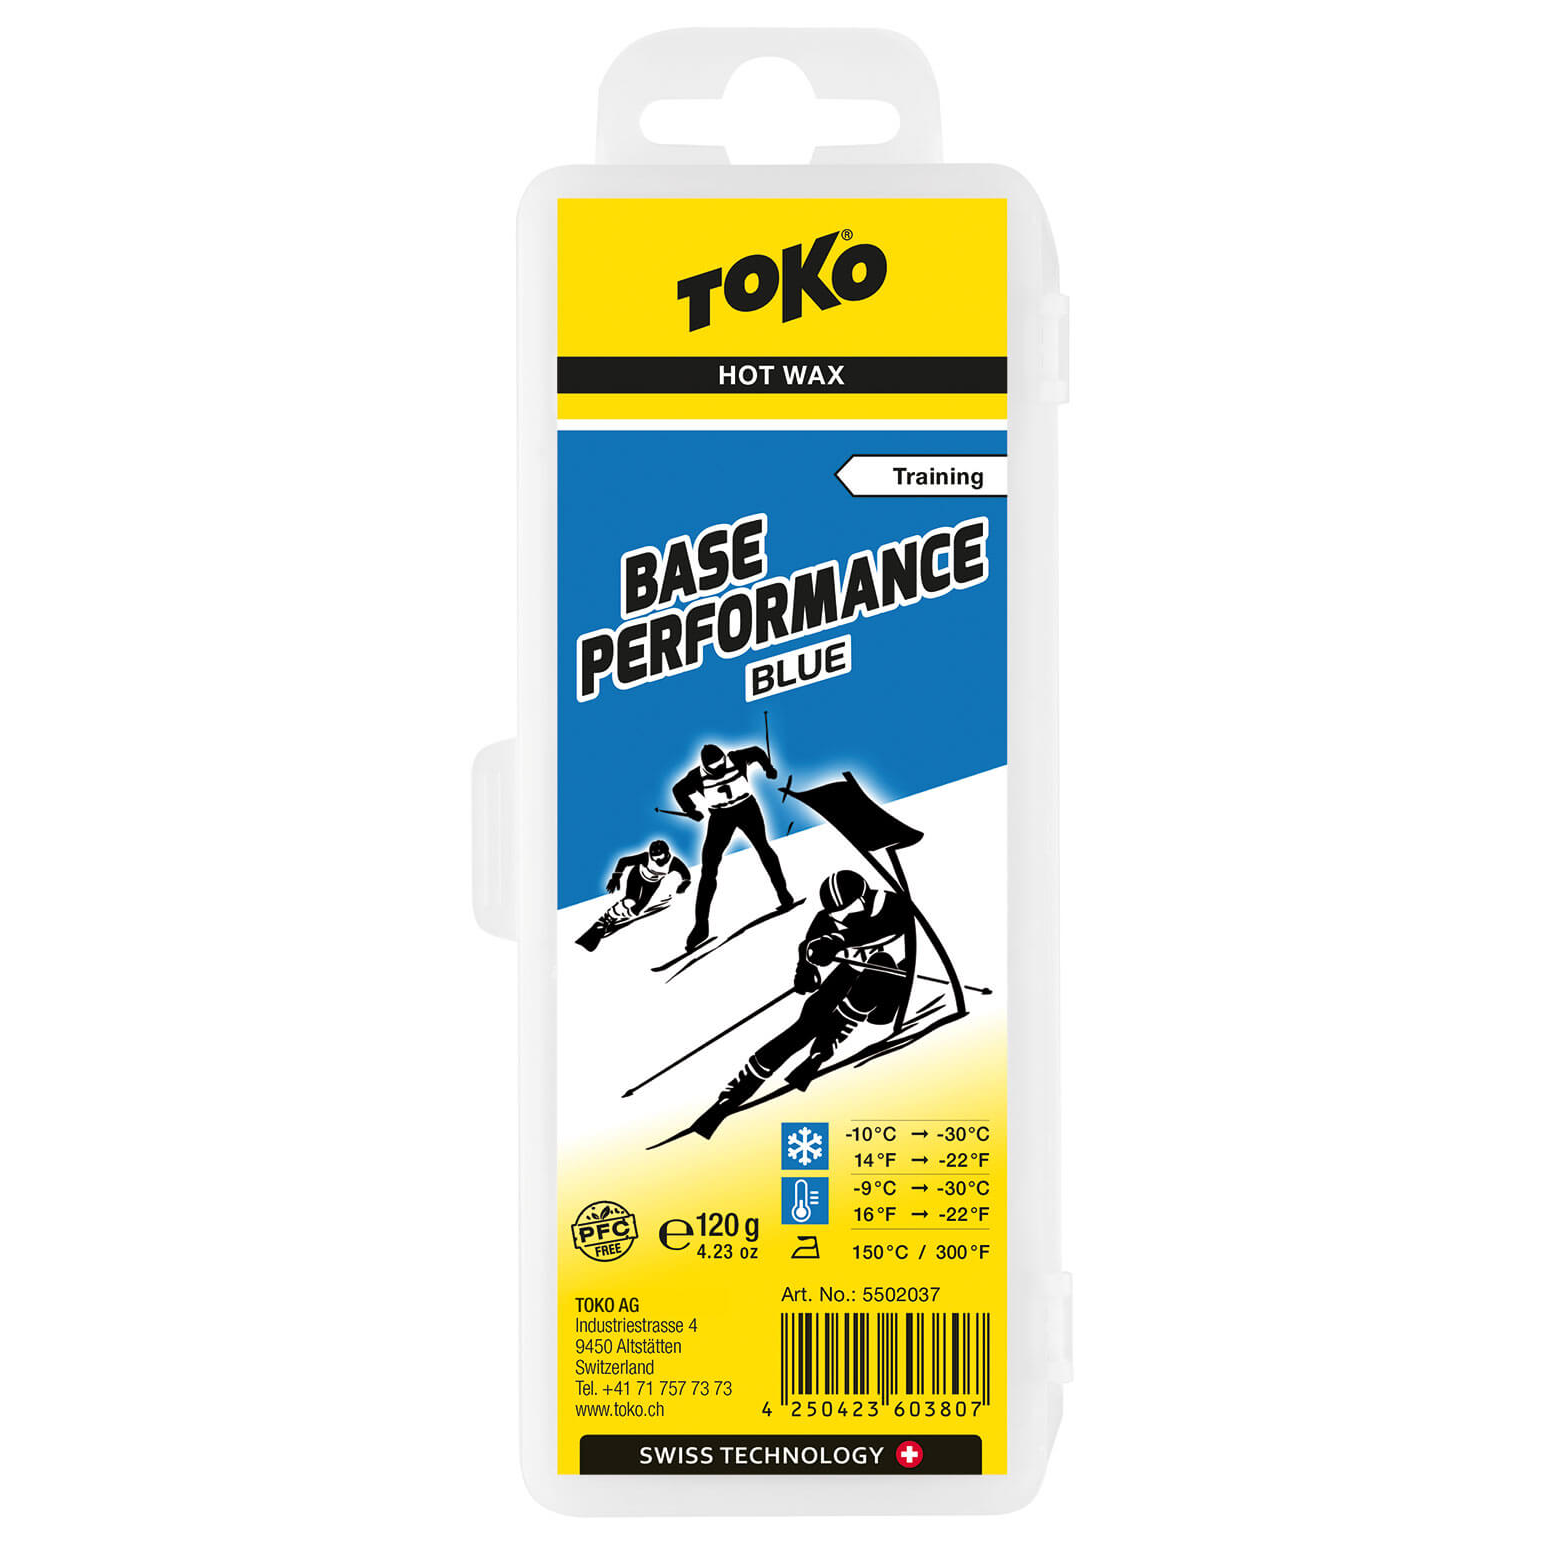 A product picture of the Toko Base Performance Blue Paraffin Melt Wax